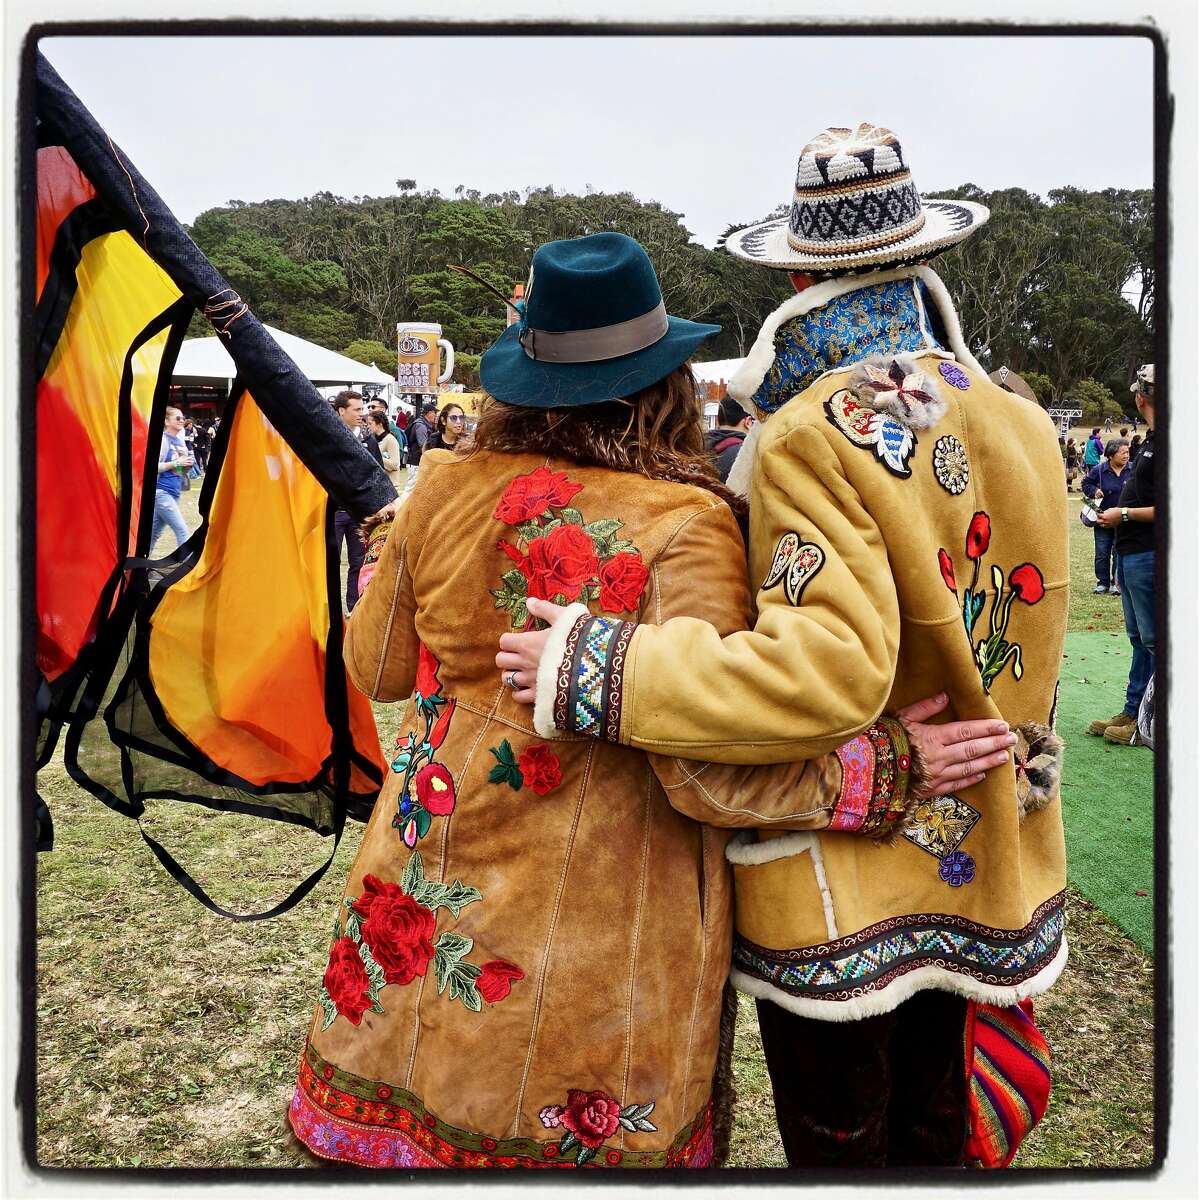 Chelsea Argabrite (left) and Jonathan Bloch wear flea market jackets they hand-embellished at Outside Lands. Aug. 13, 2017.